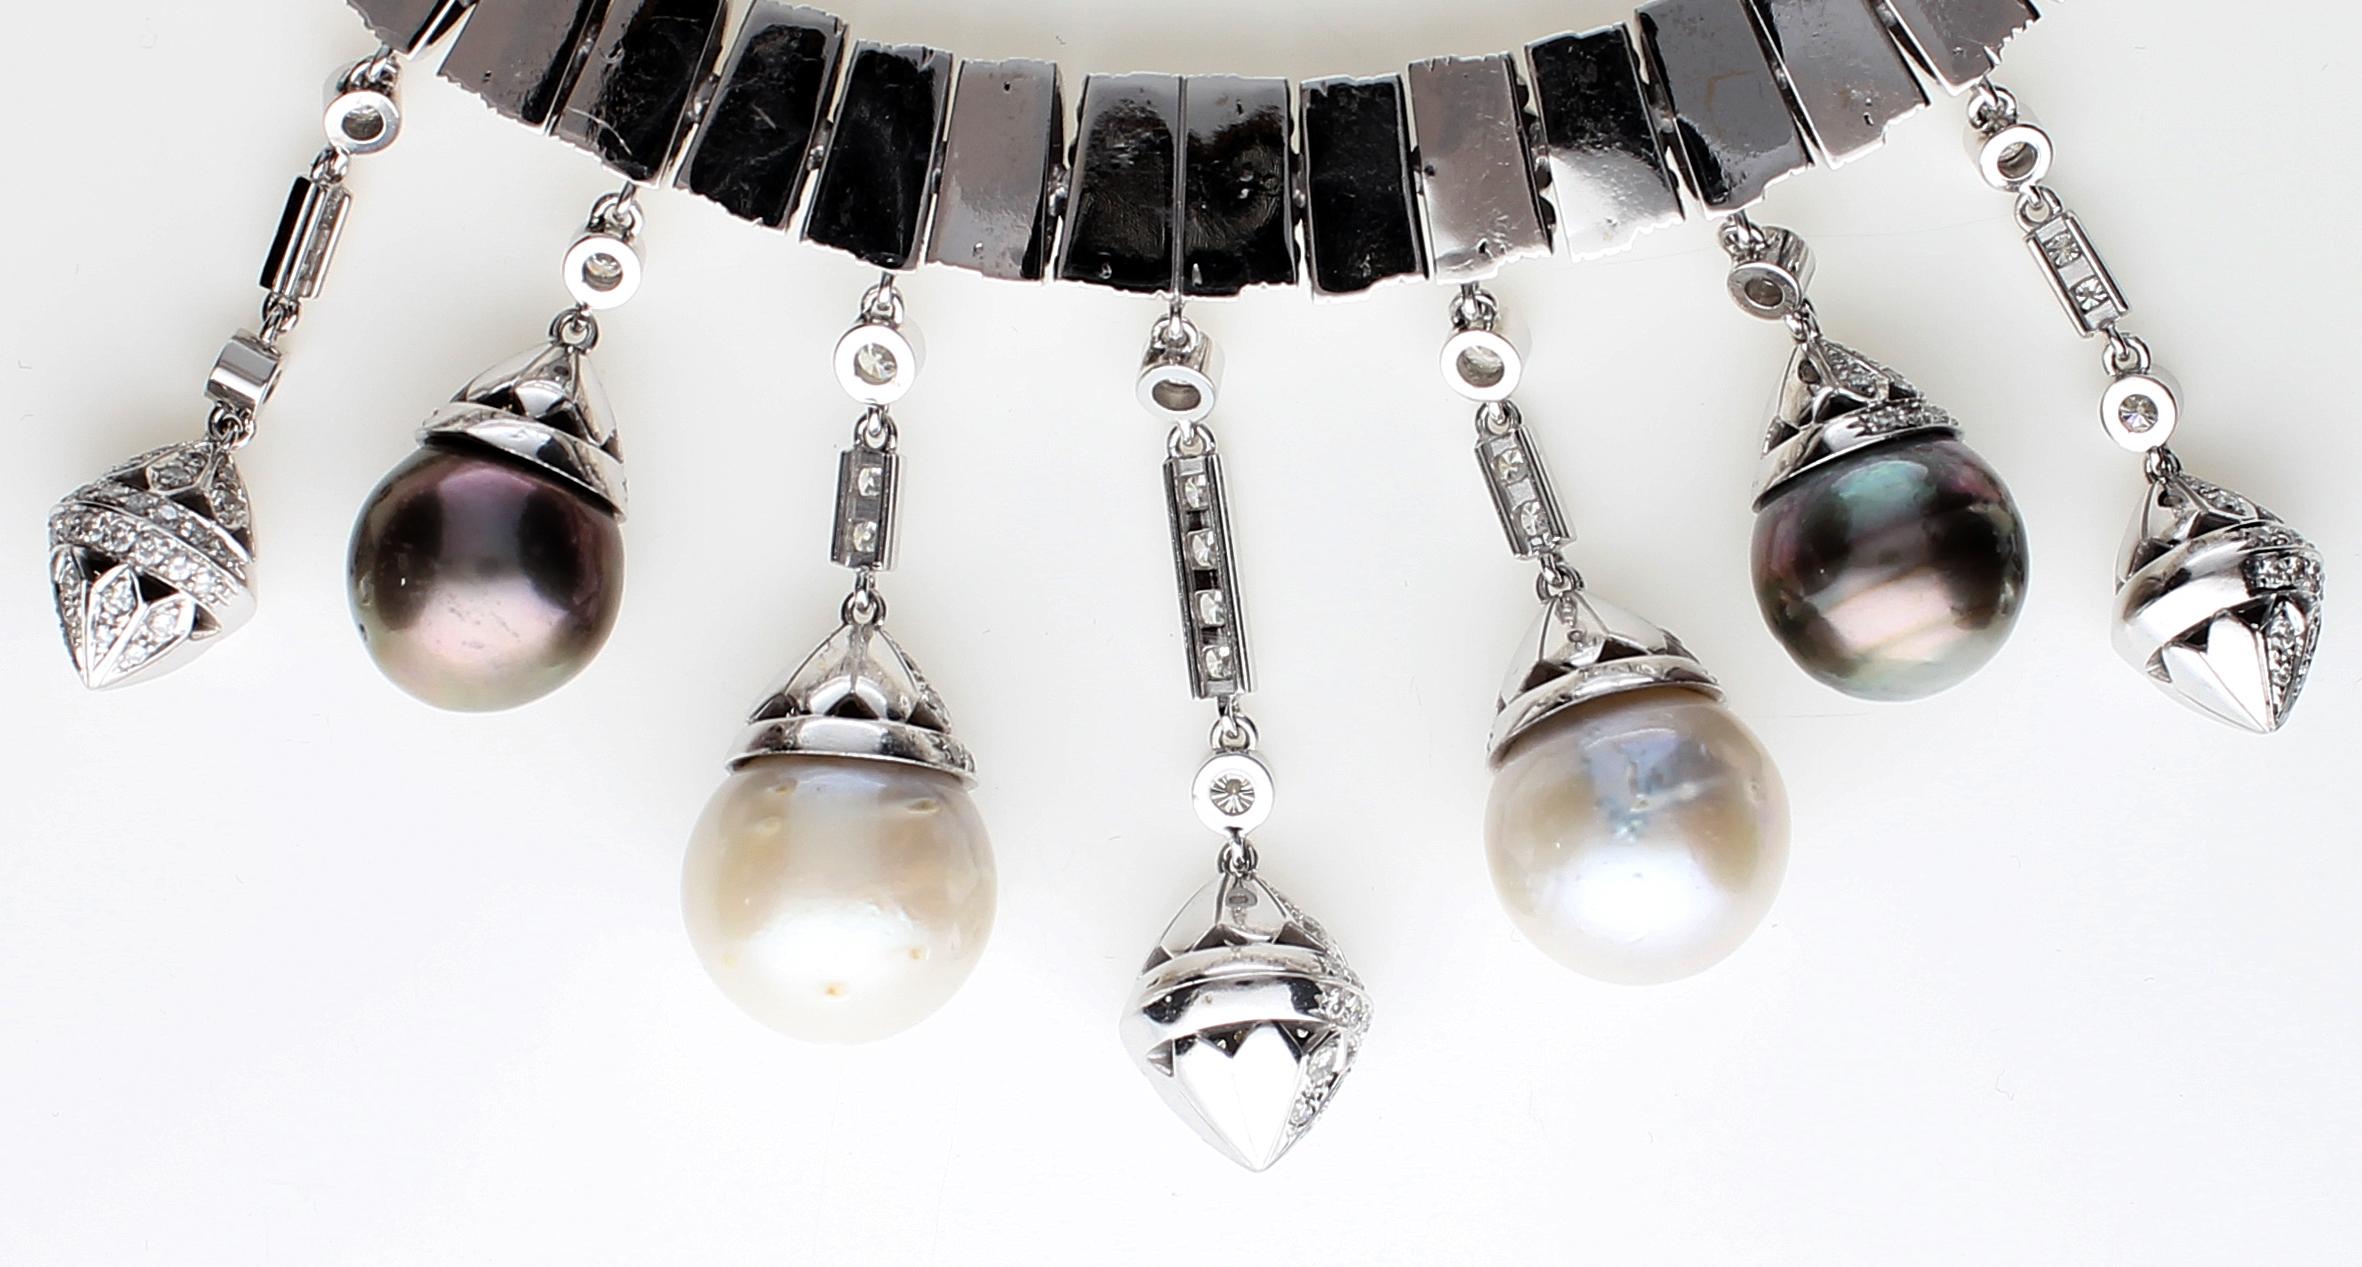 Necklace White Gold and Diamonds, Pendants with White and Black Pearls S.S. For Sale 14